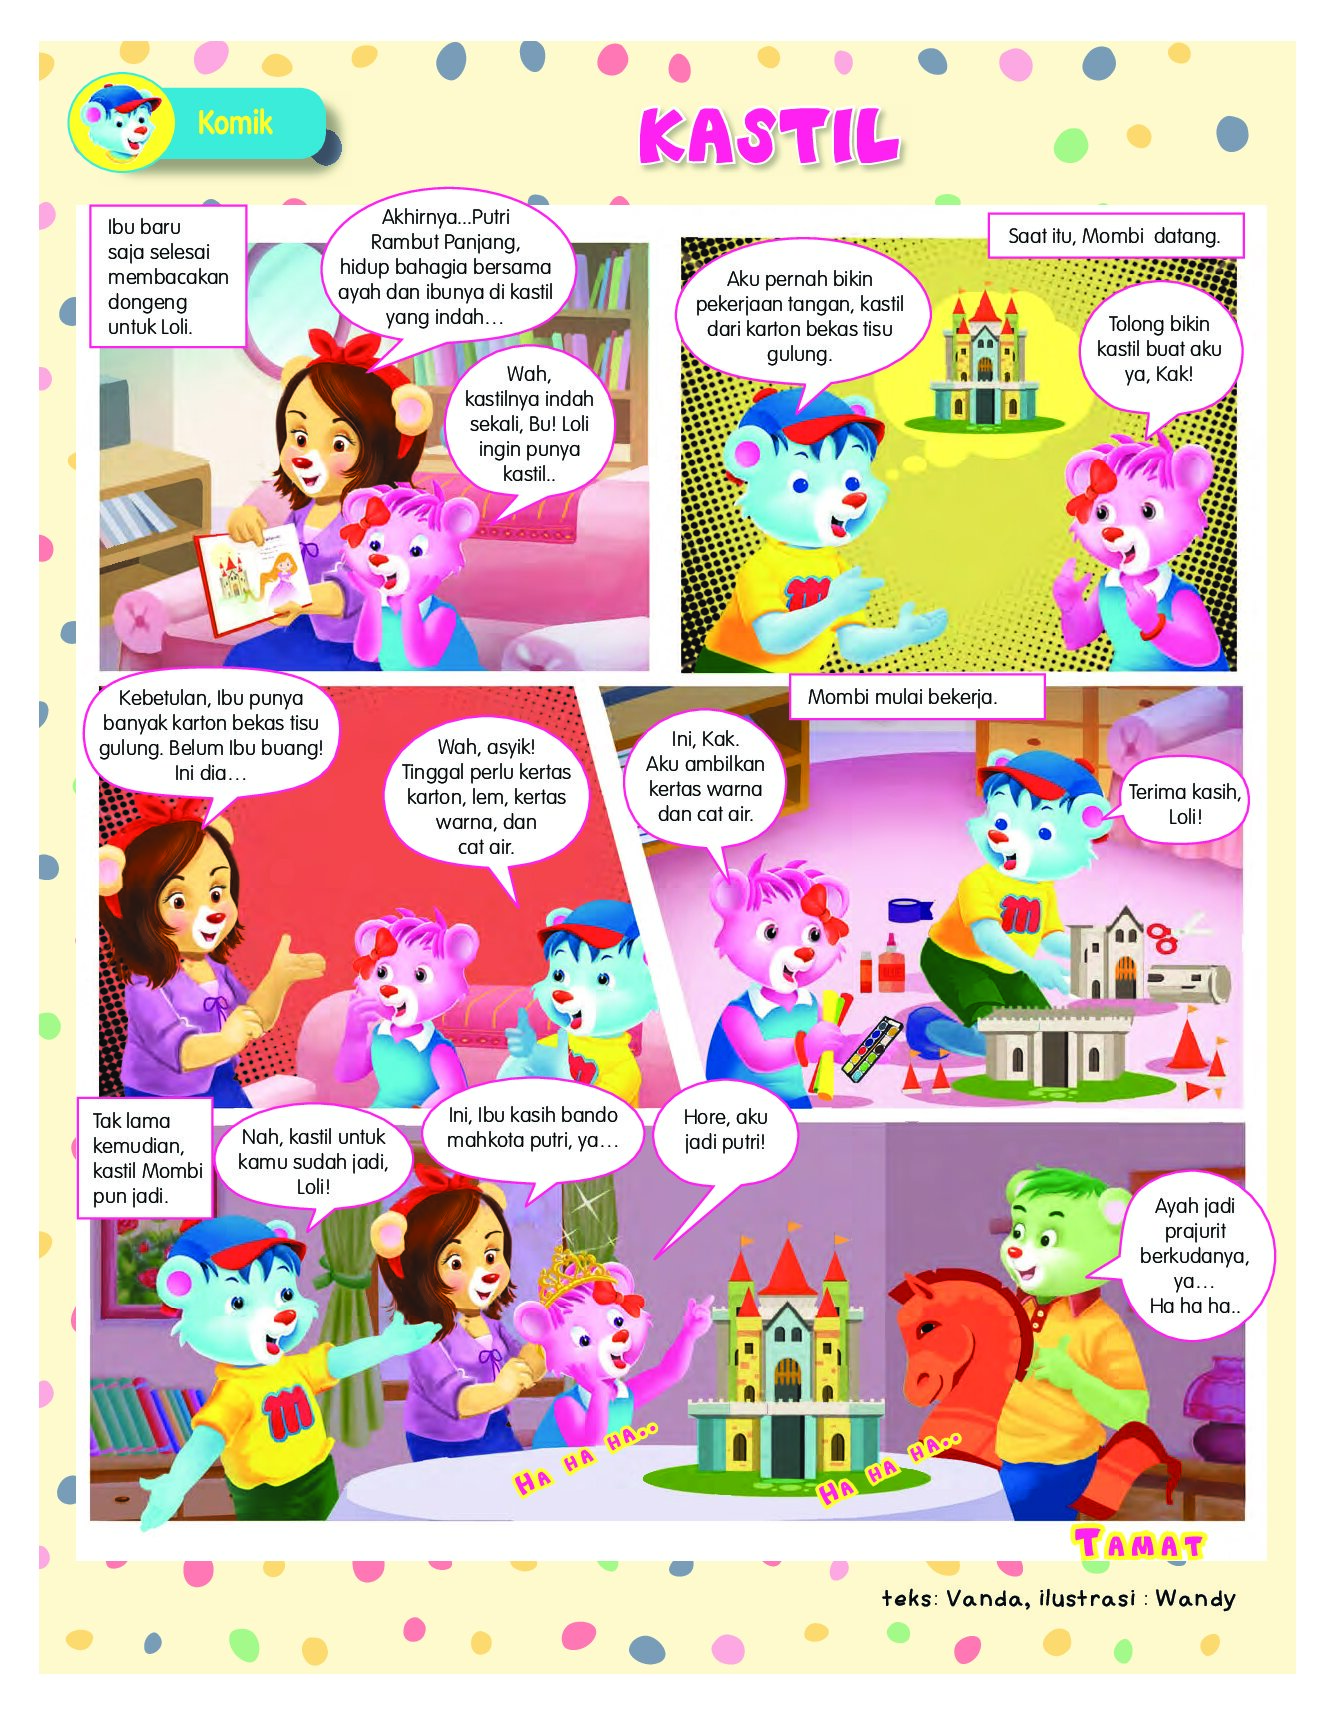 MOMBI SD Page 1